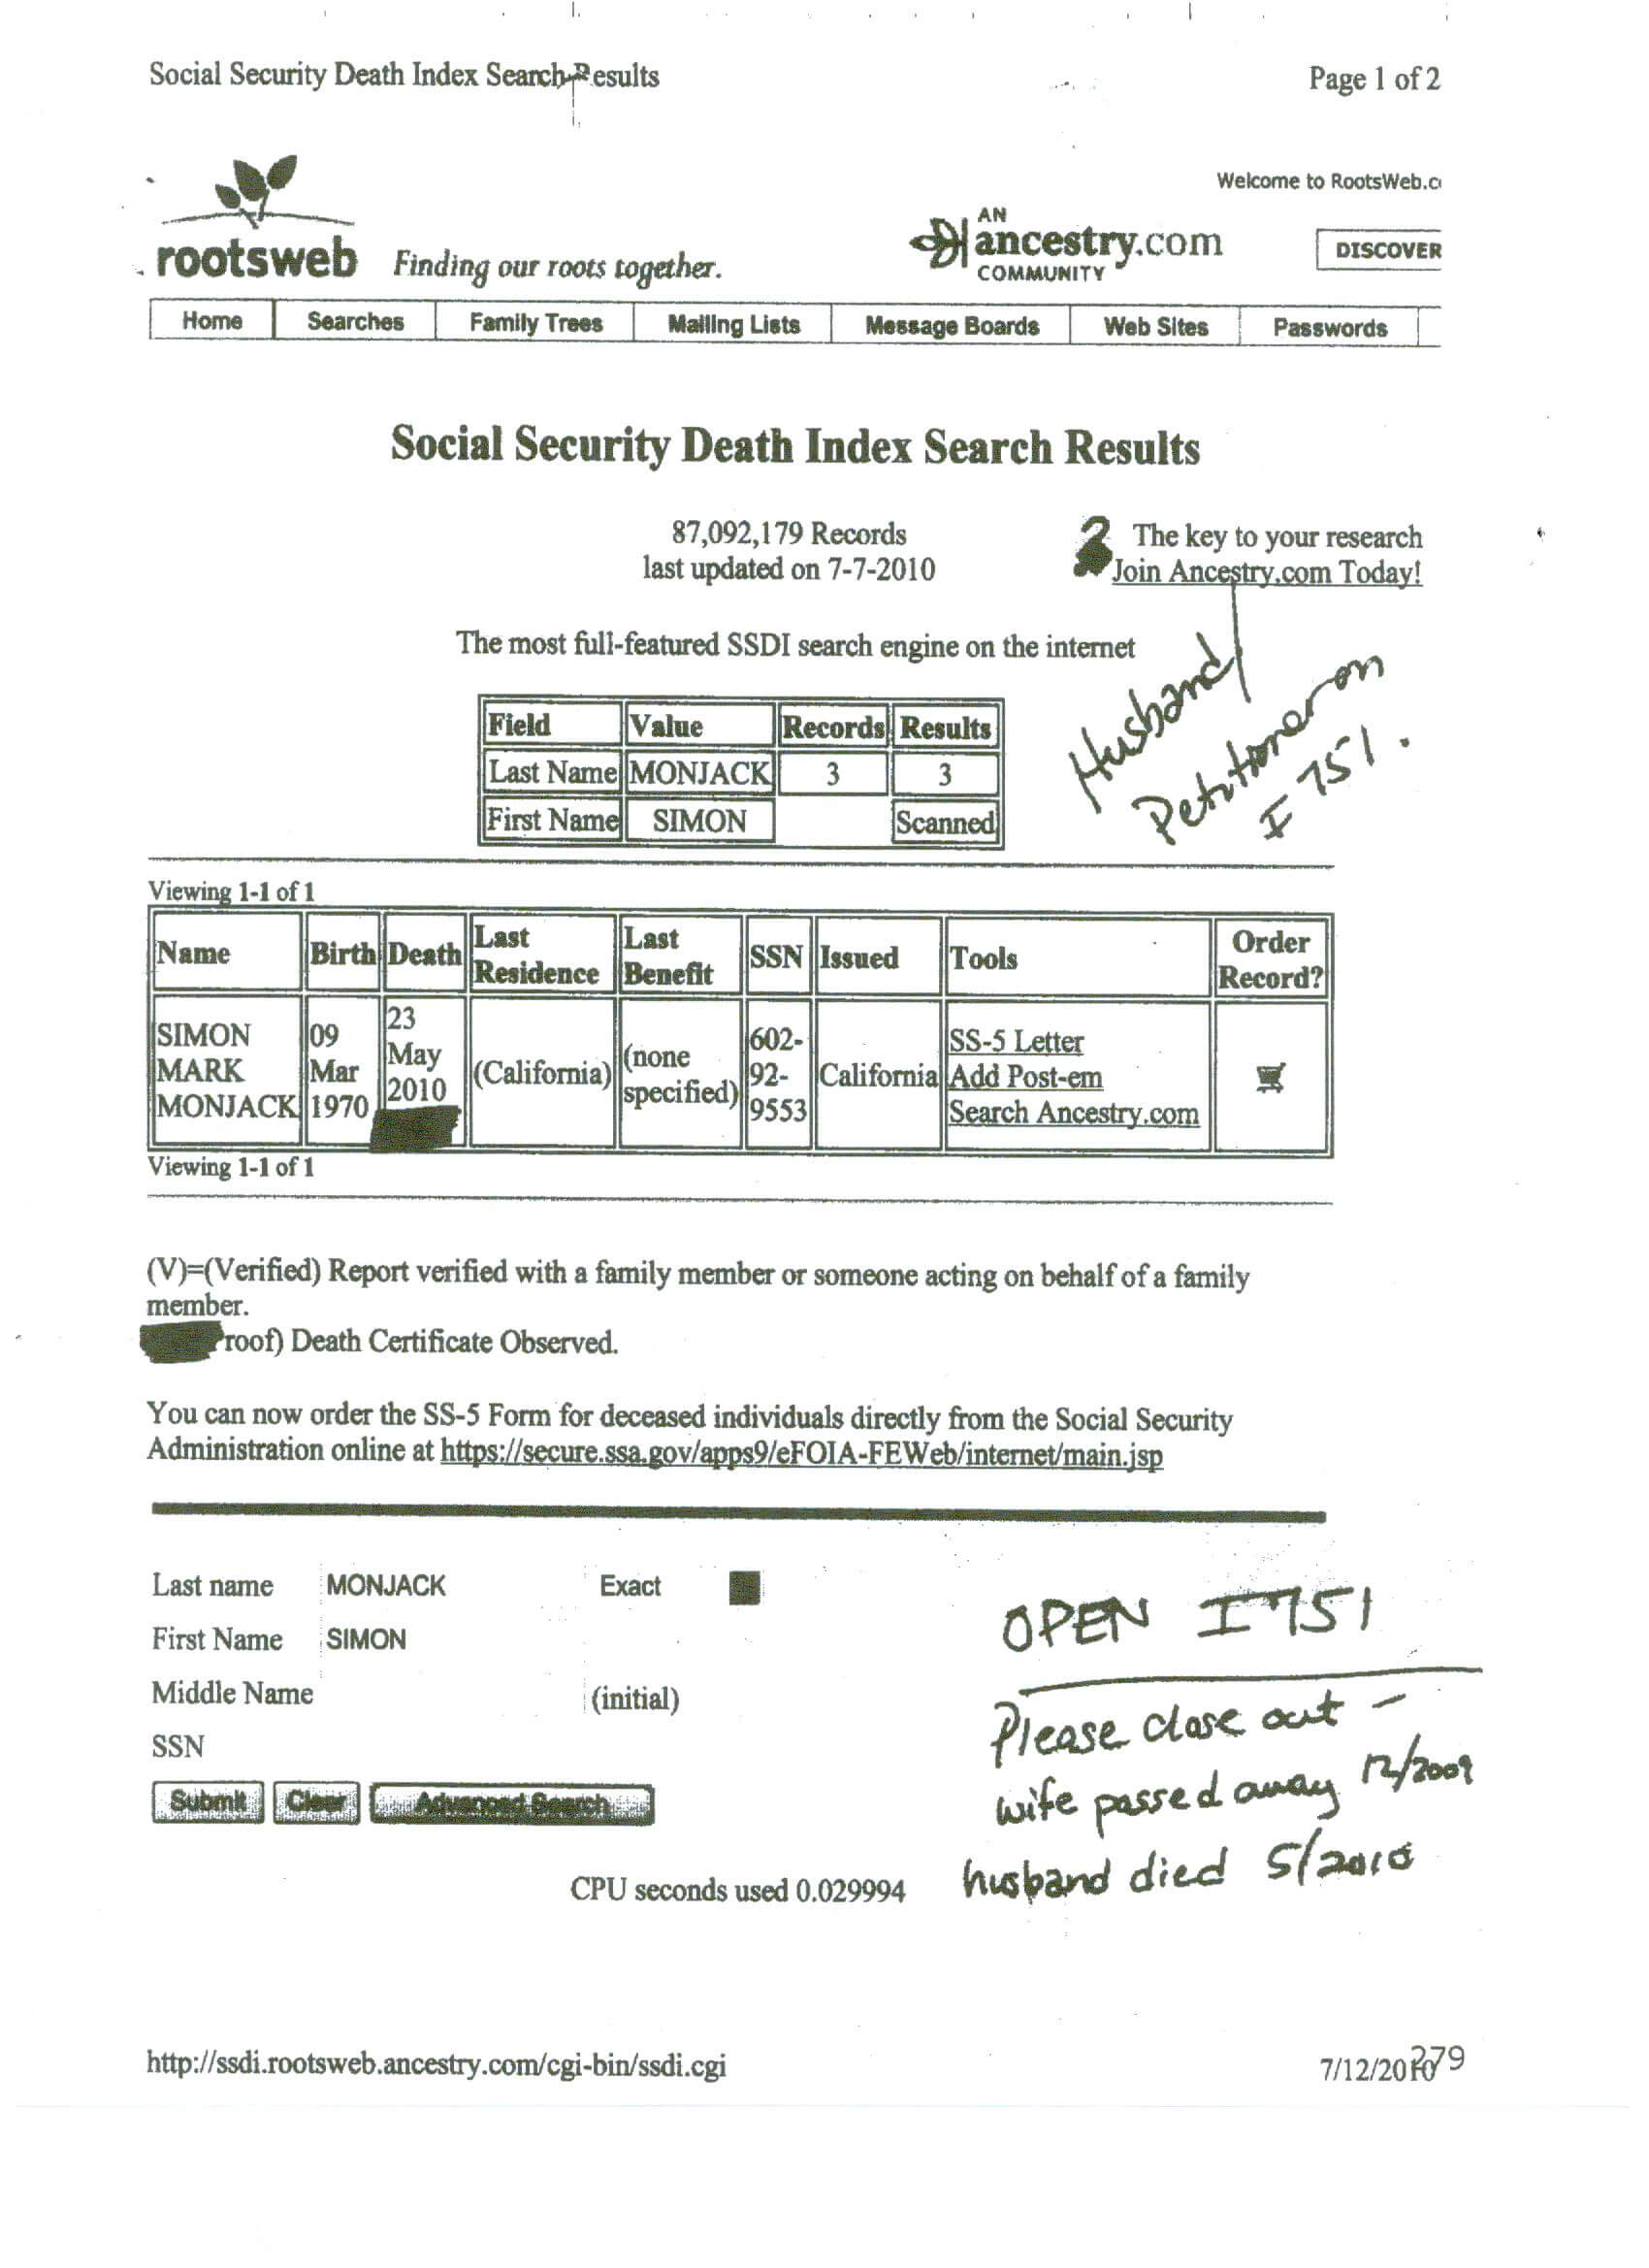 DHS MARRIAGE FRAUD AGAINST BRITTANY MURPHY AND SIMON MONJACK-PAGE2